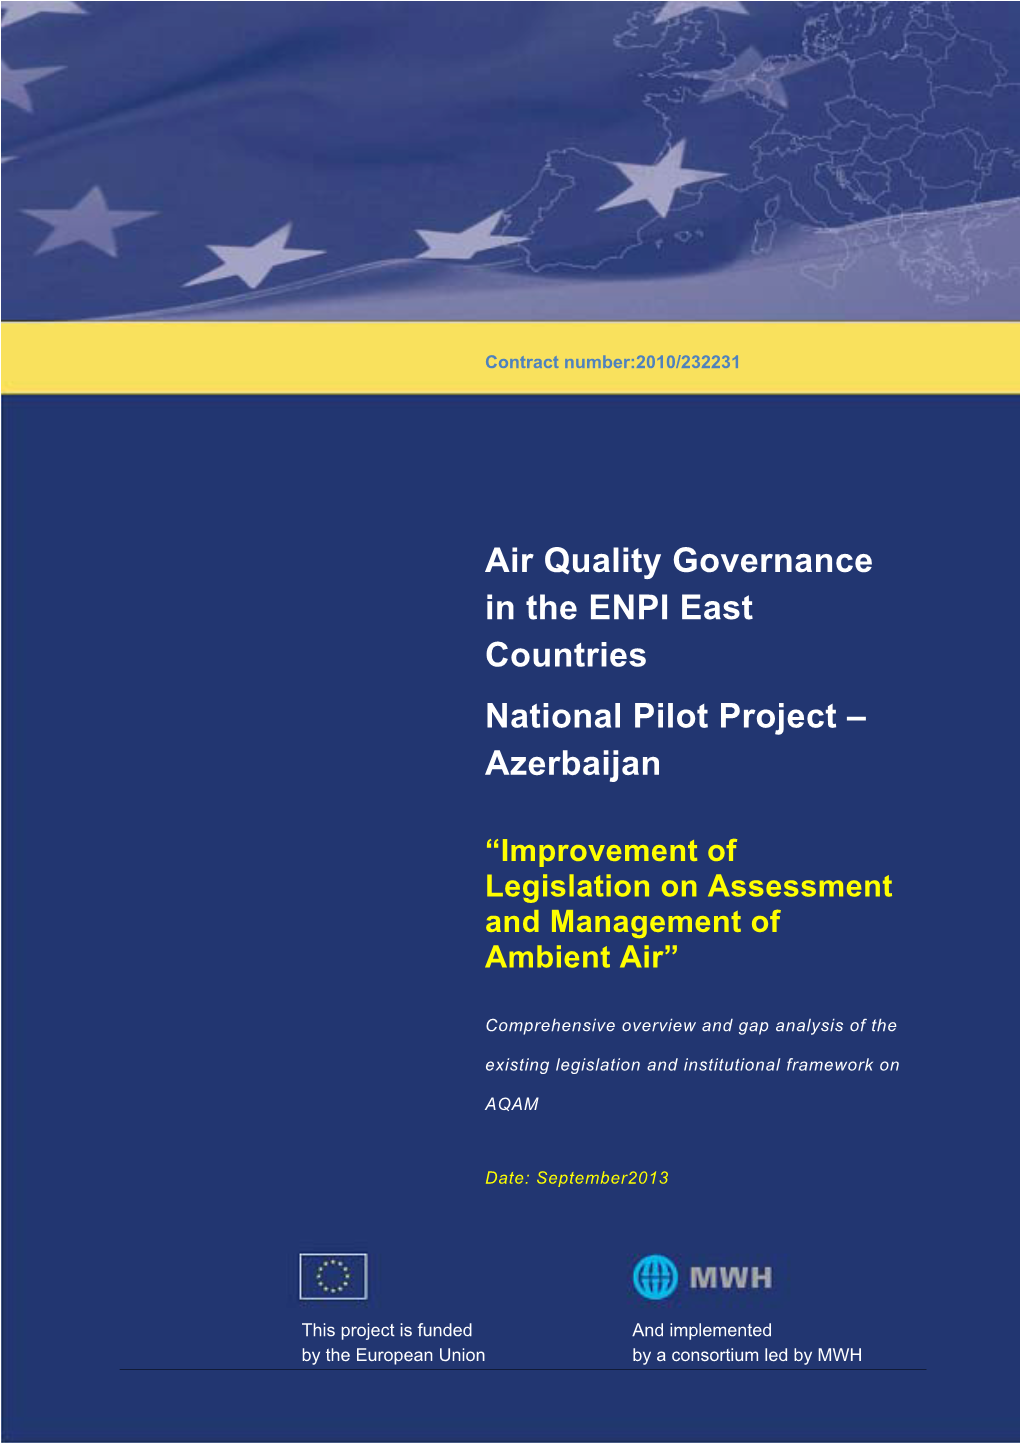 Air Quality Governance in the ENPI East Countries National Pilot Project – Azerbaijan